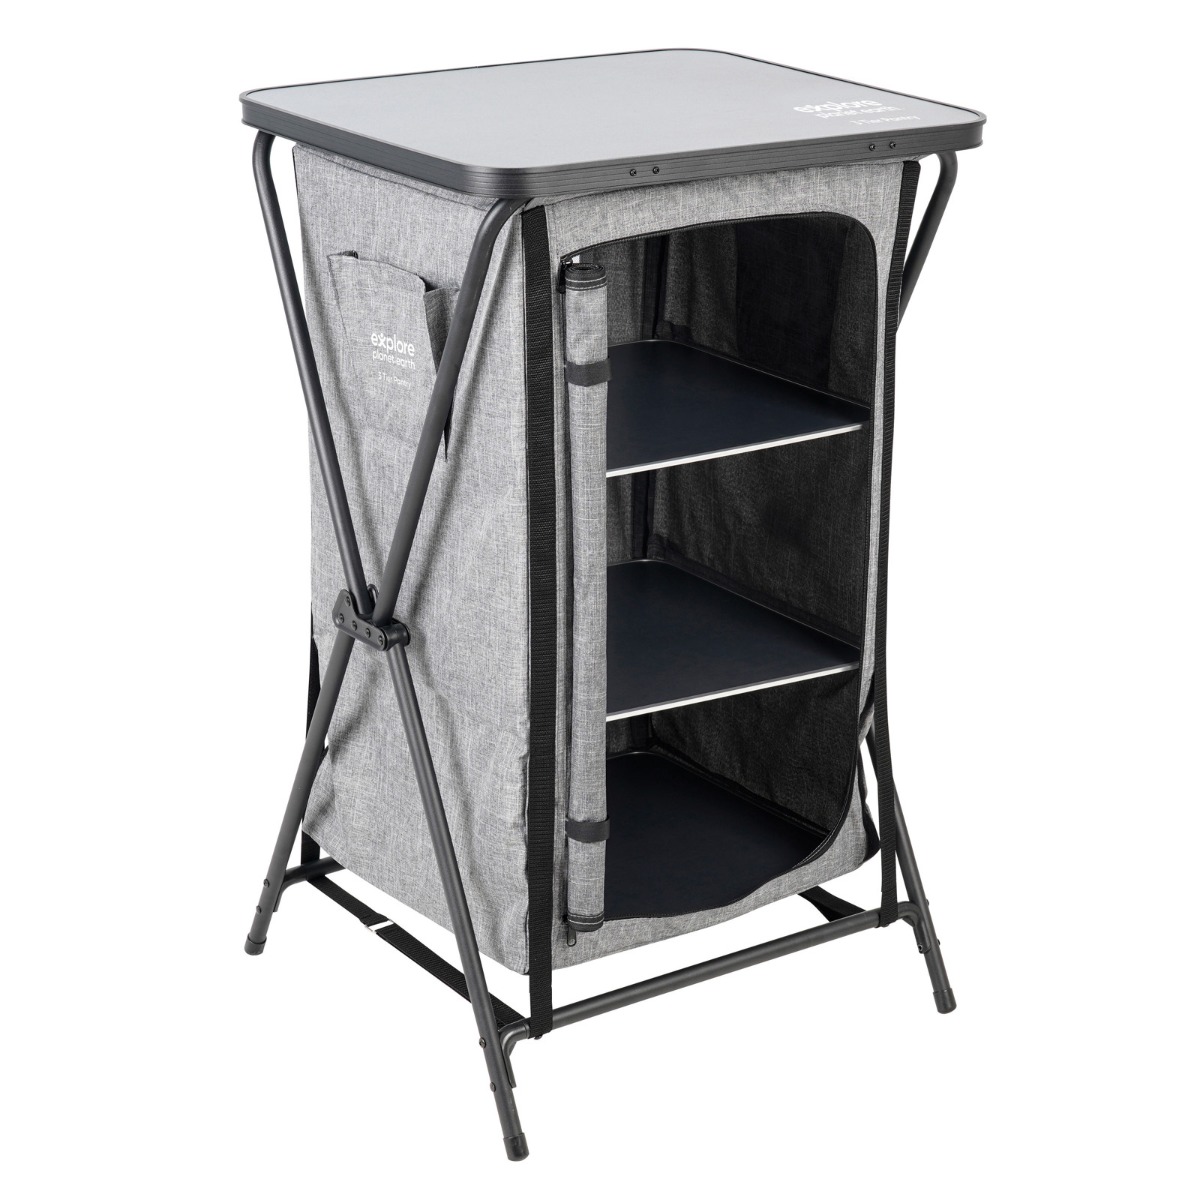 EPE 3 TIER QUICK FOLD PANTRY